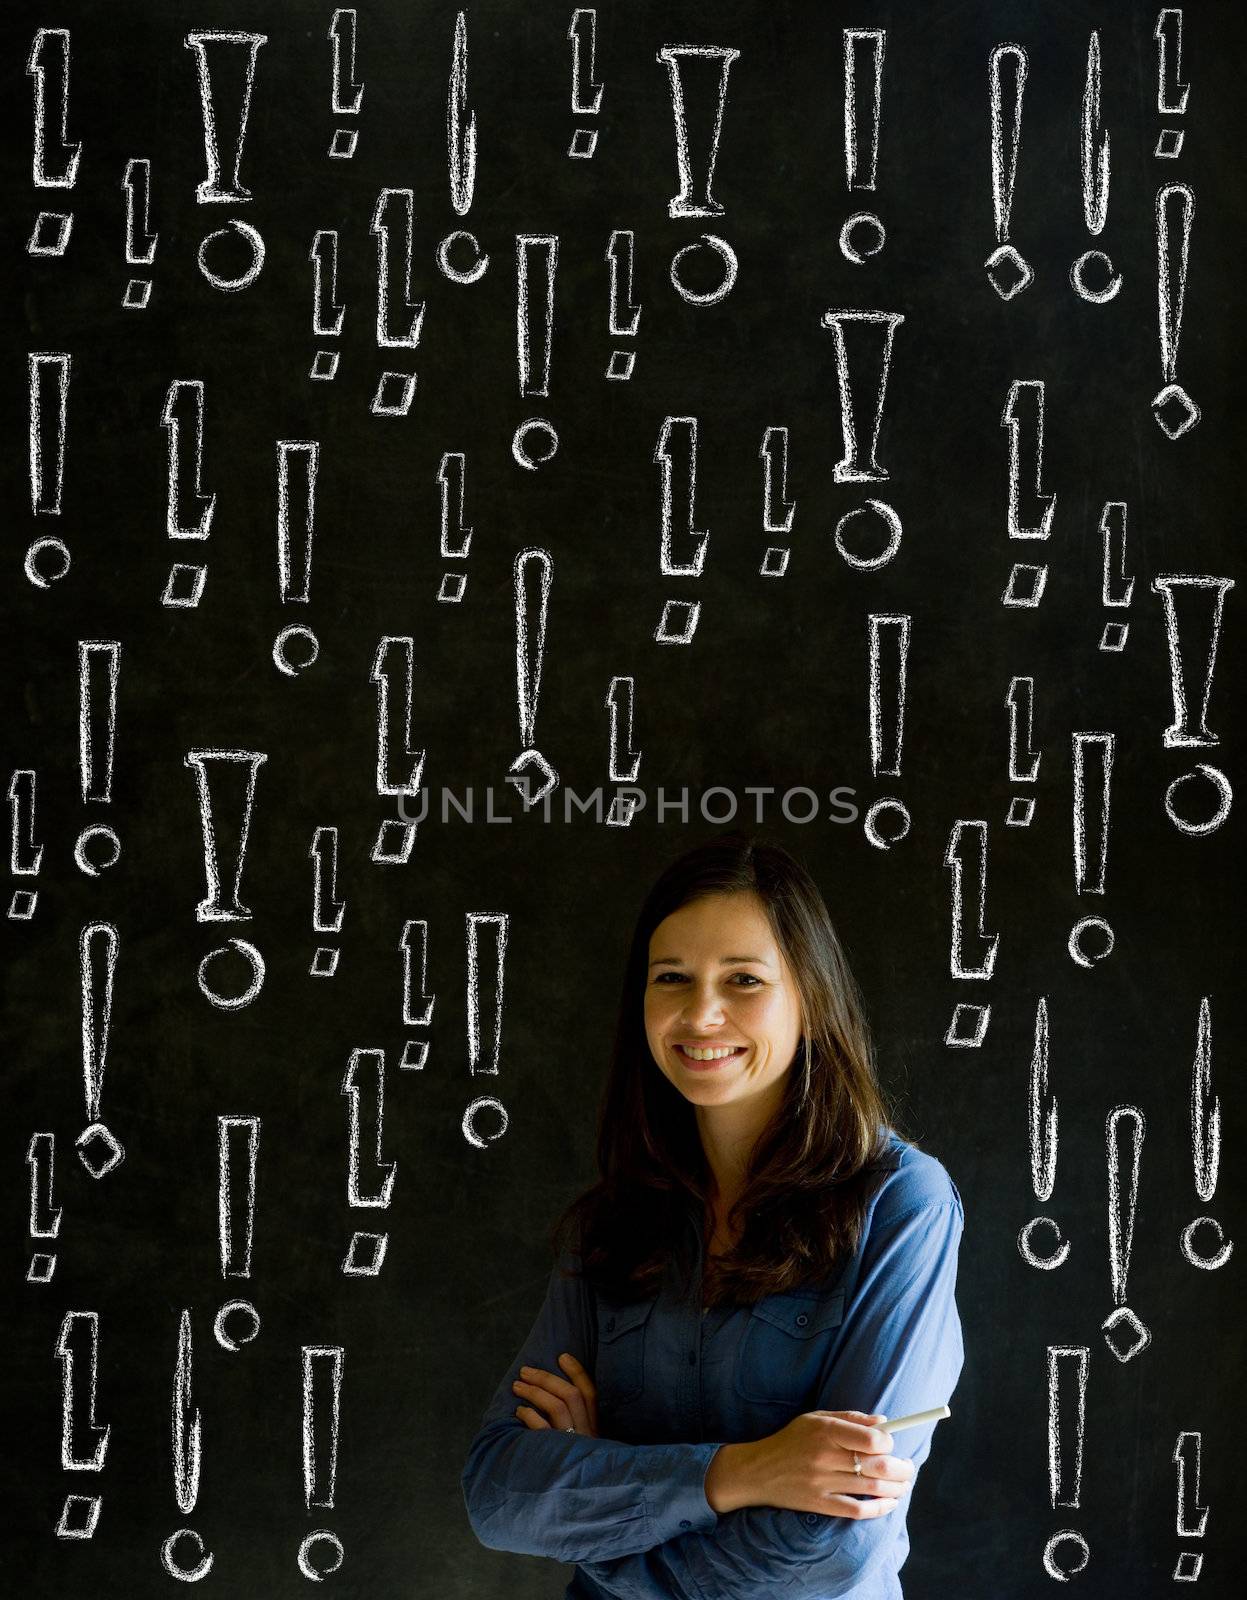 Businesswoman, student or teacher with chalk exclamation marks on blackboard background